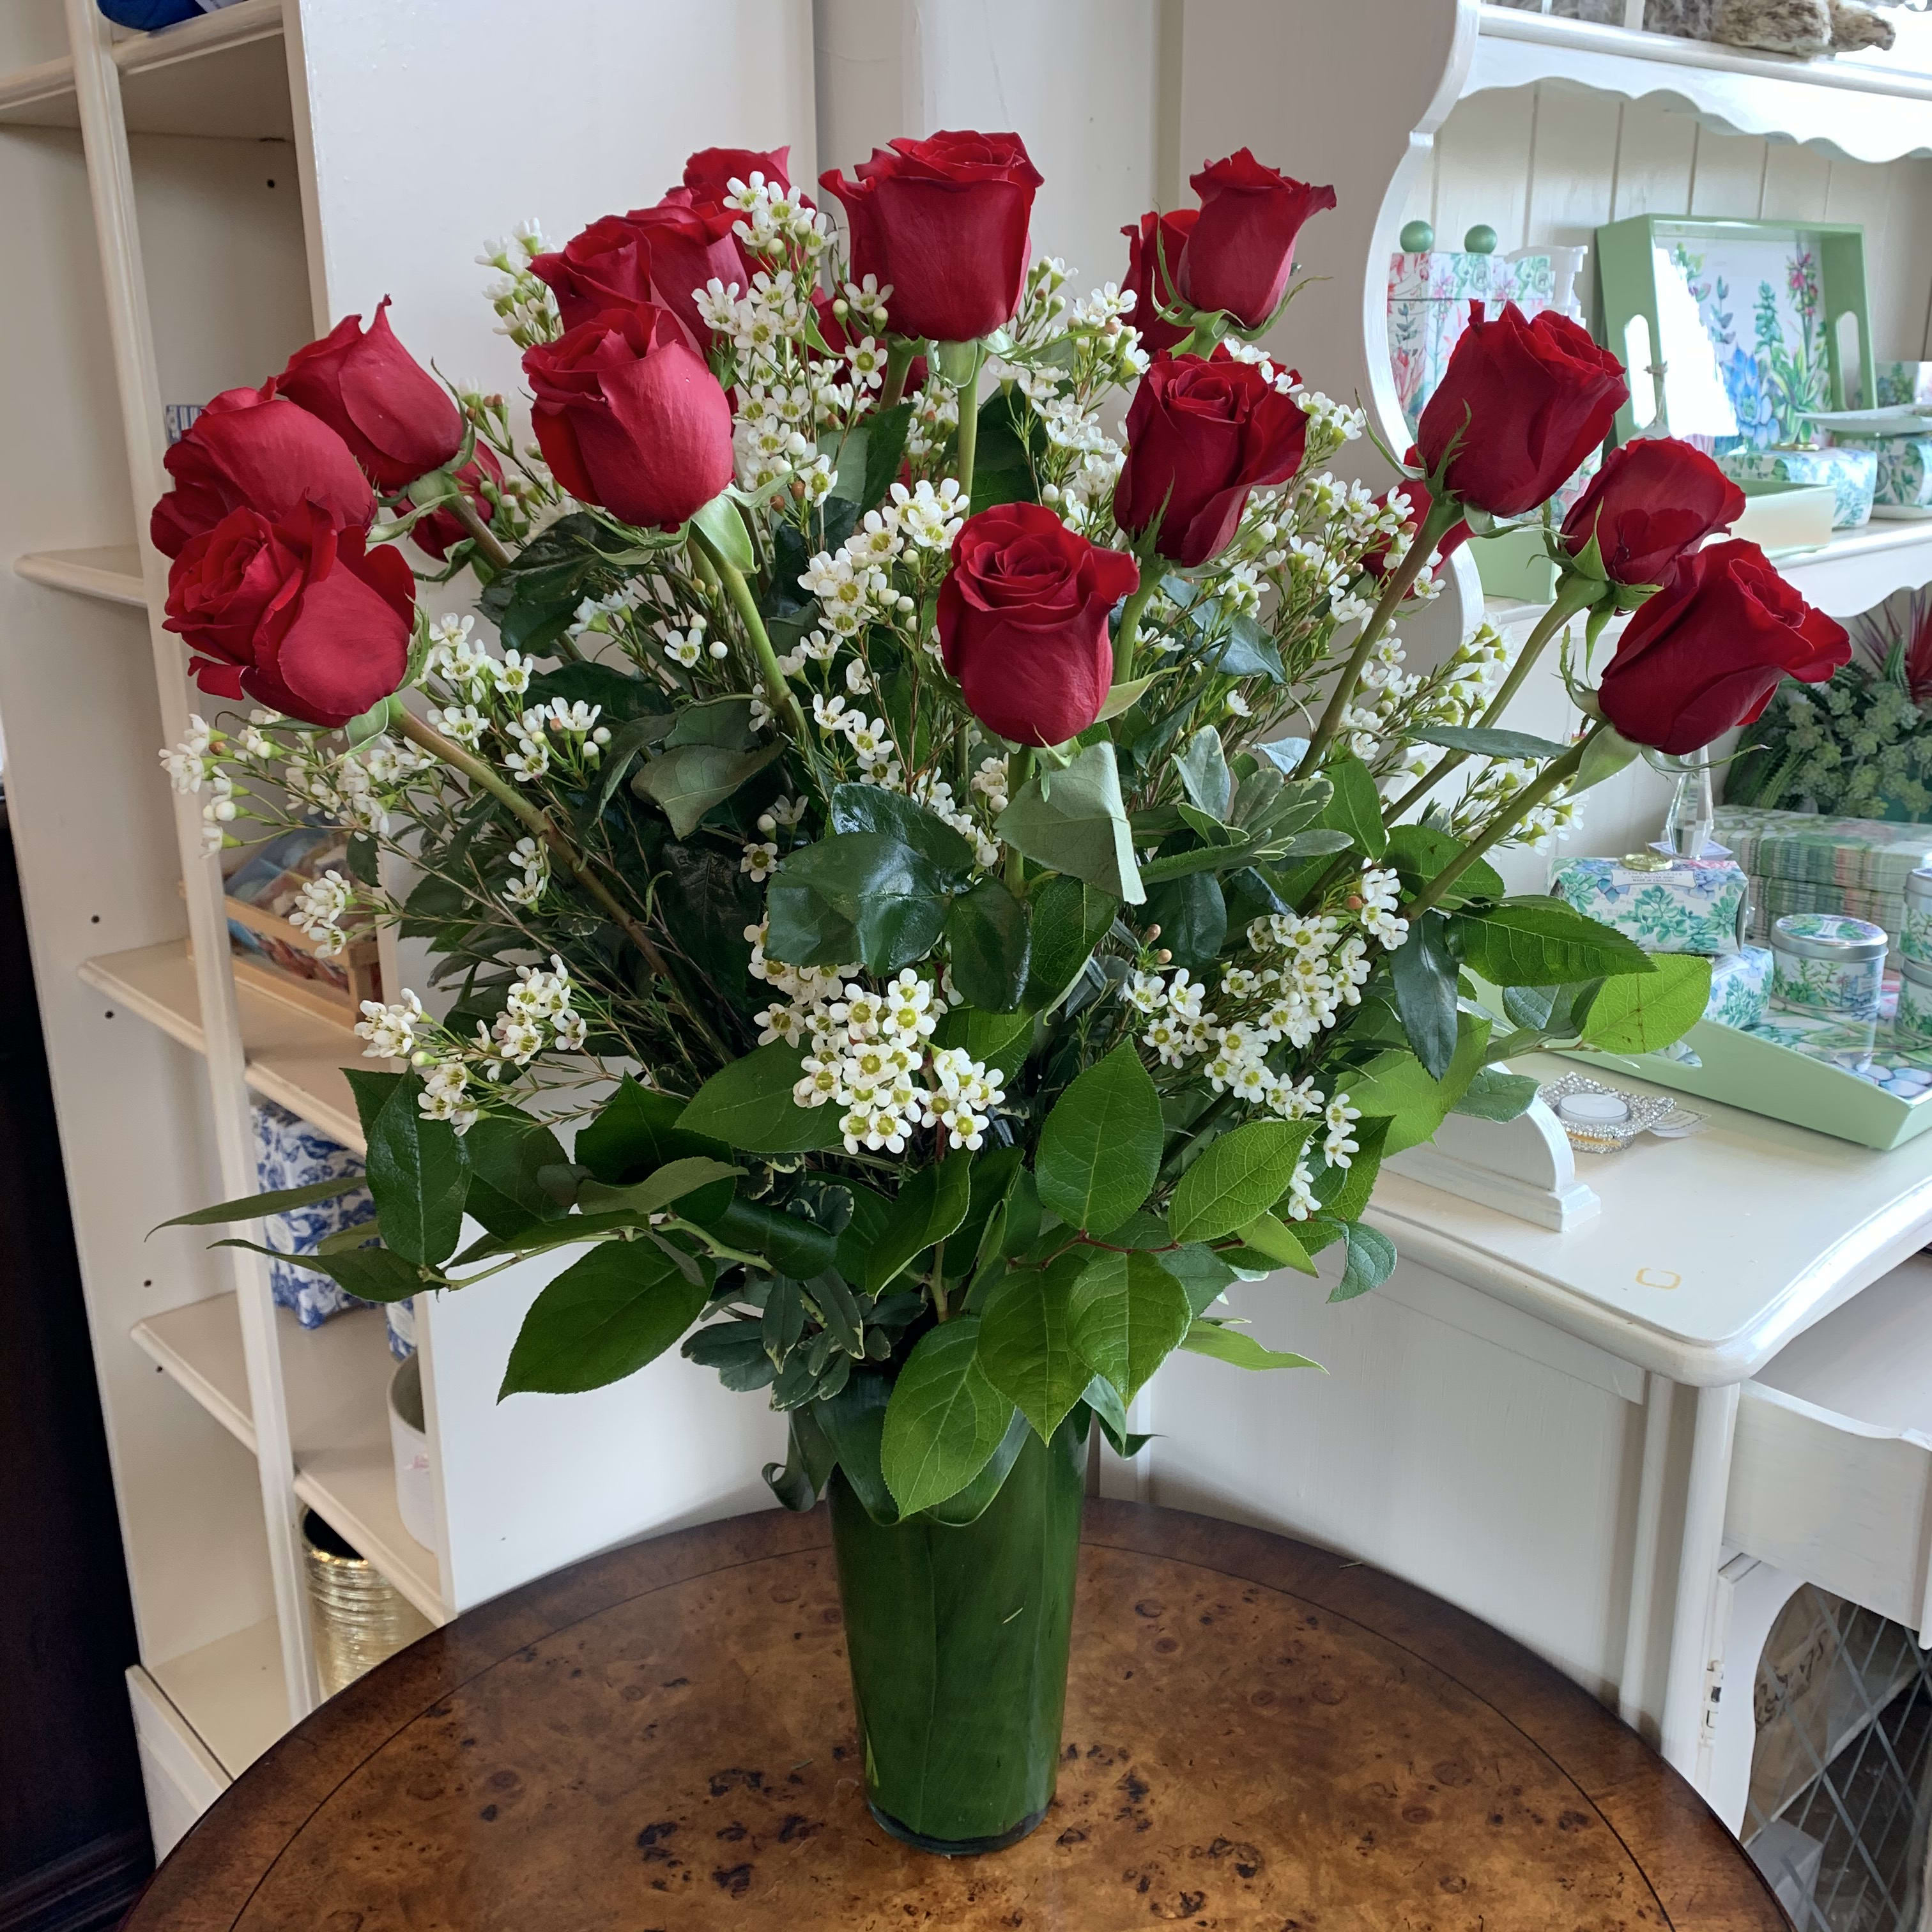 2 Dozen Red Rose Bouquet - 2 dozen long stem red roses arranged in a leaf lined glass vase with premium greens and complimenting filler flowers.